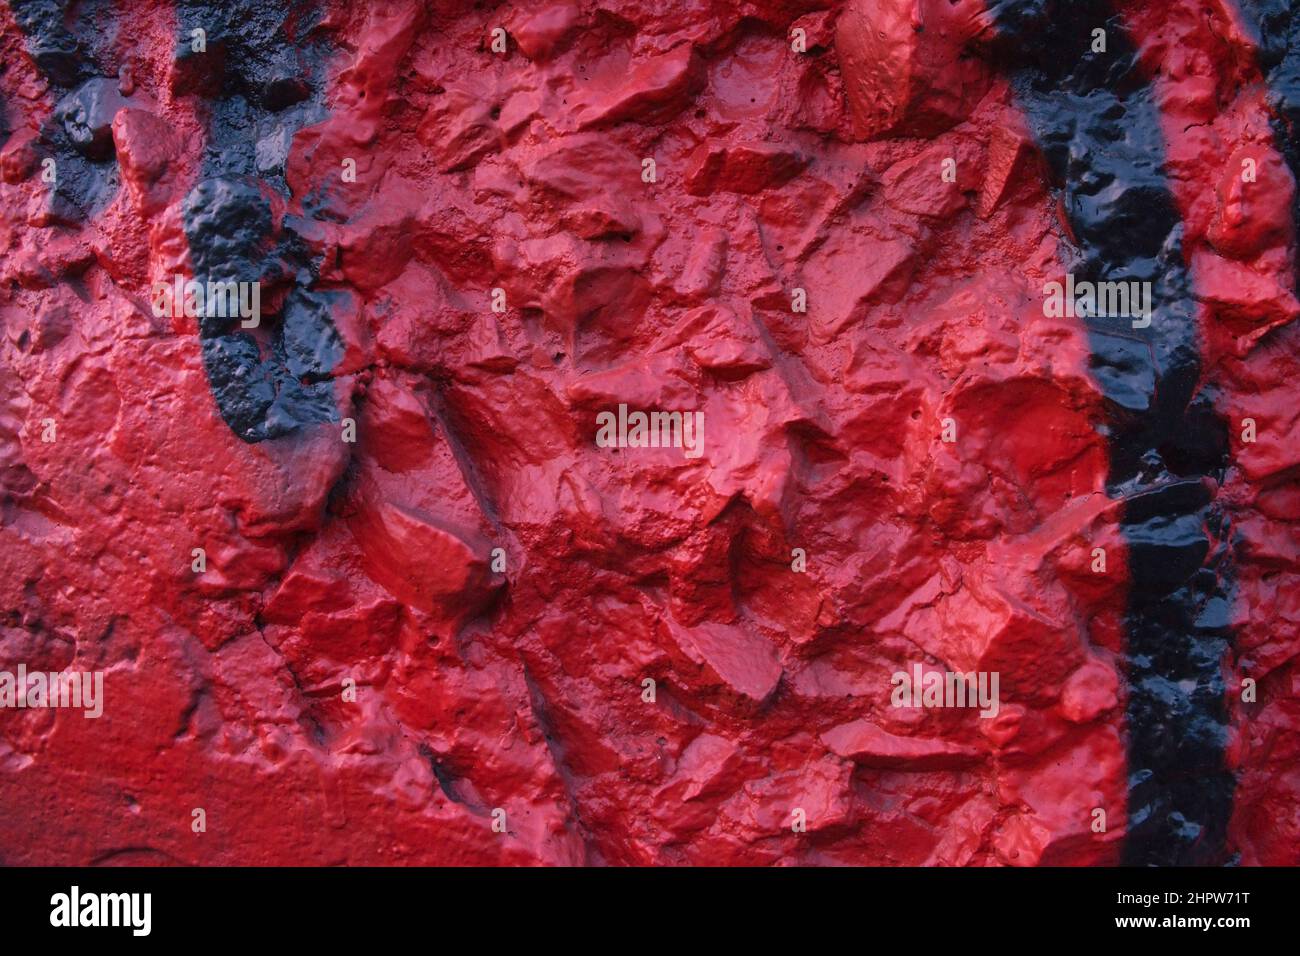 Dark red painted relief wall with rough chaotic convex elements. Concrete wall covered uneven decorative stucco and painted dark red and black paint.  Stock Photo